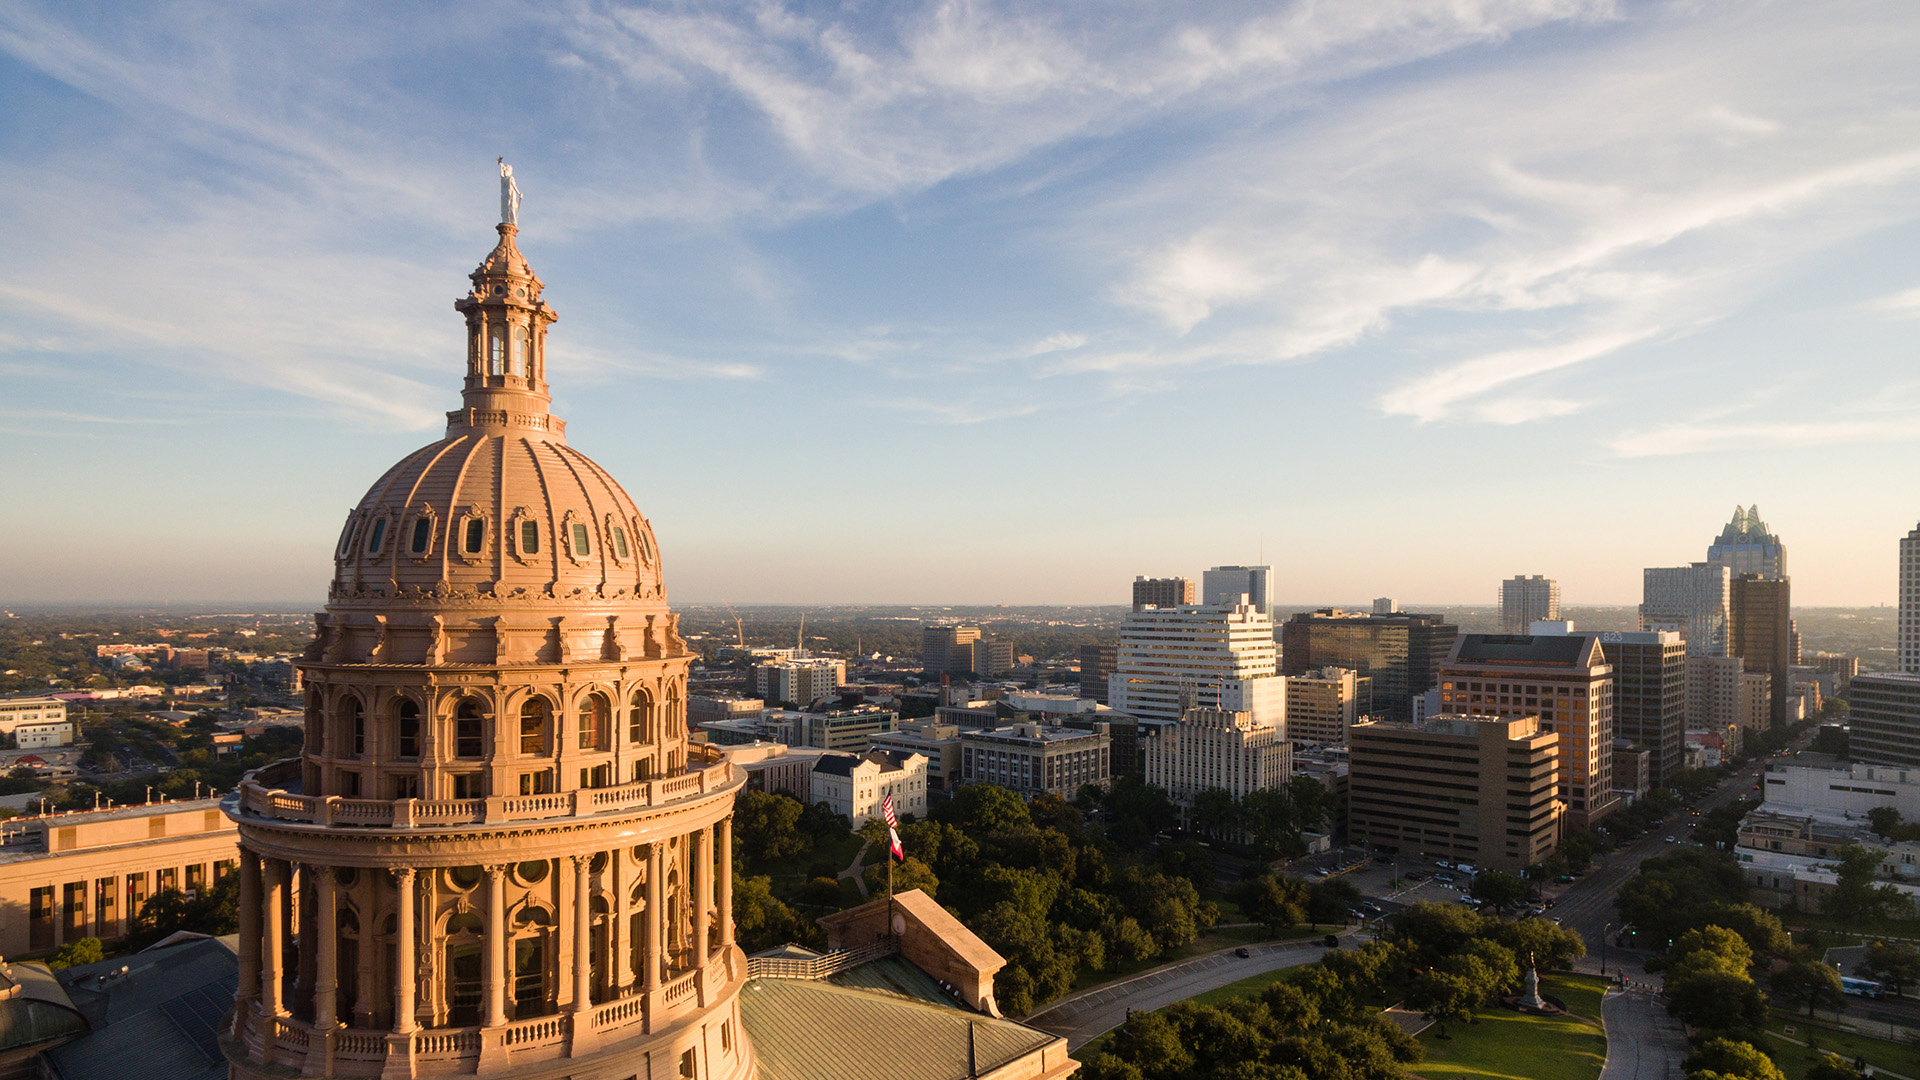 Texas State Capitol in Austin